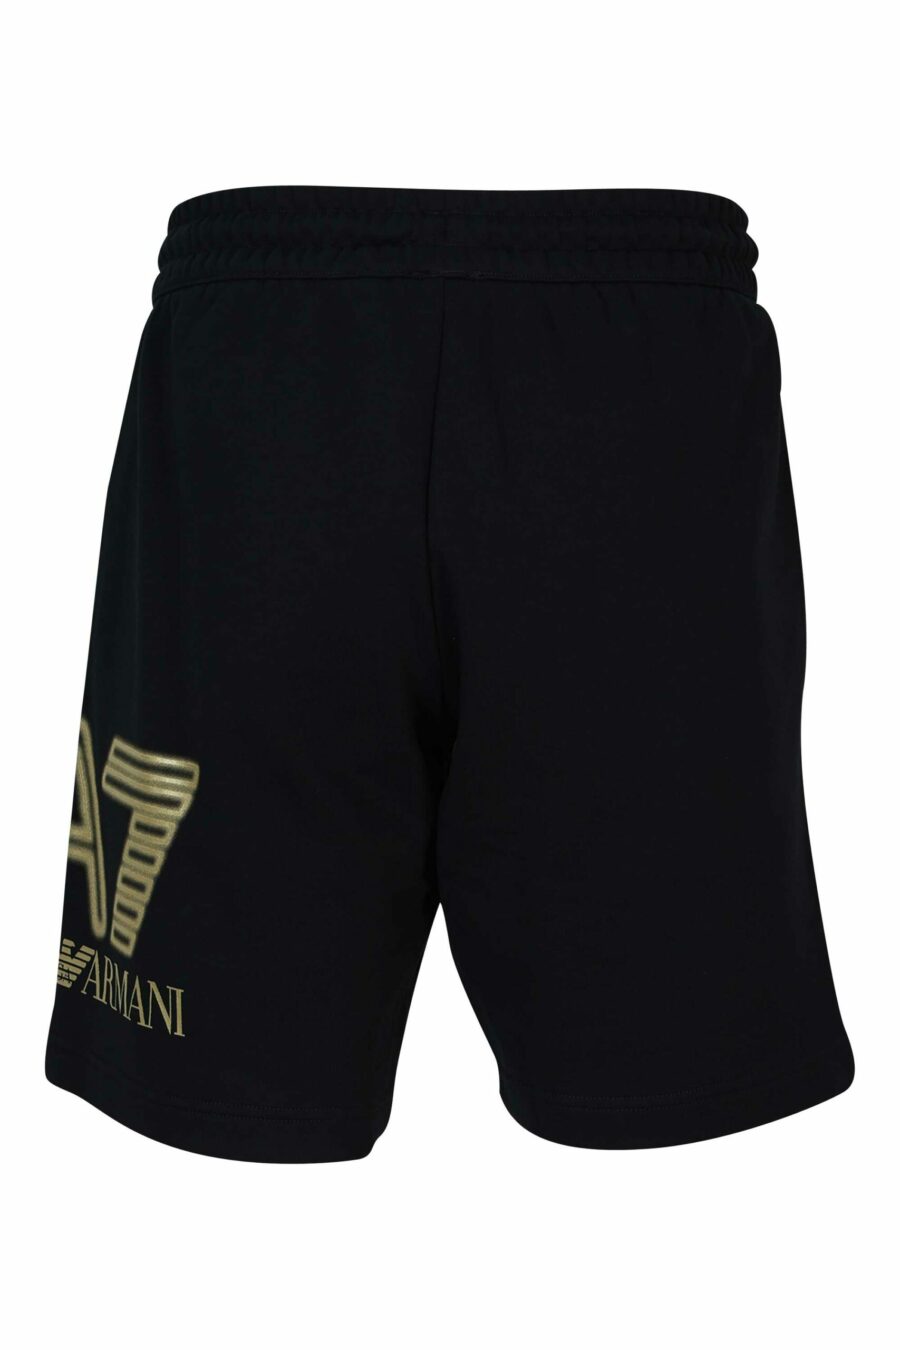 Tracksuit bottoms black with gold "lux identity" maxilogue on the side - 8058947466702 2 scaled